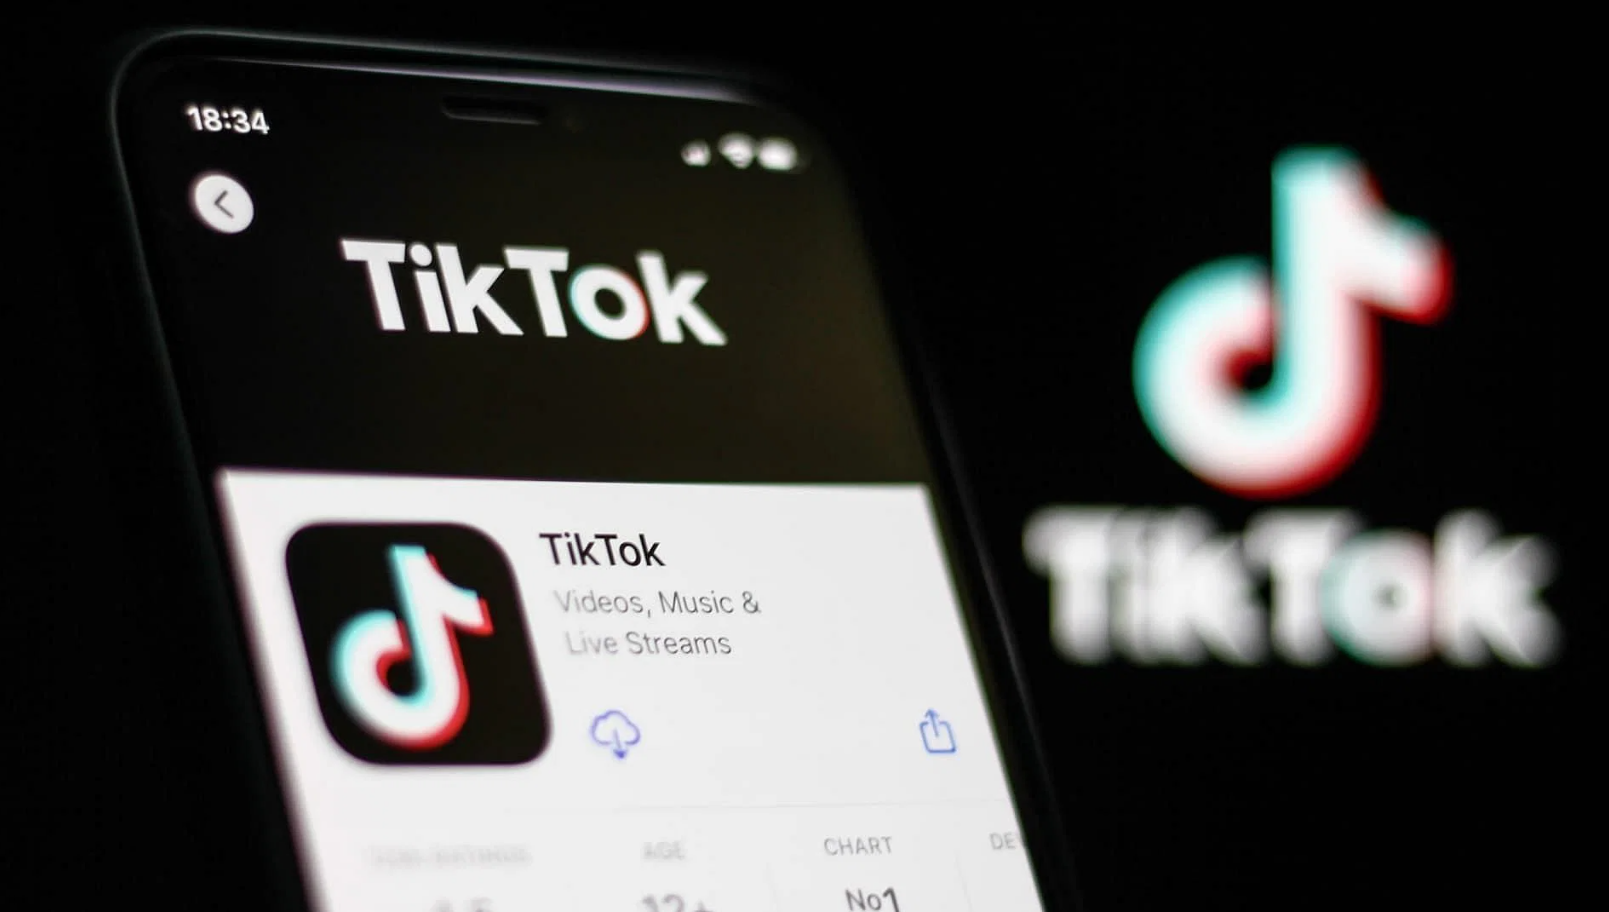 Want to know how to delete drafts on TikTok? Follow our easy guide to clear your drafts folder and free up your phone’s storage space.